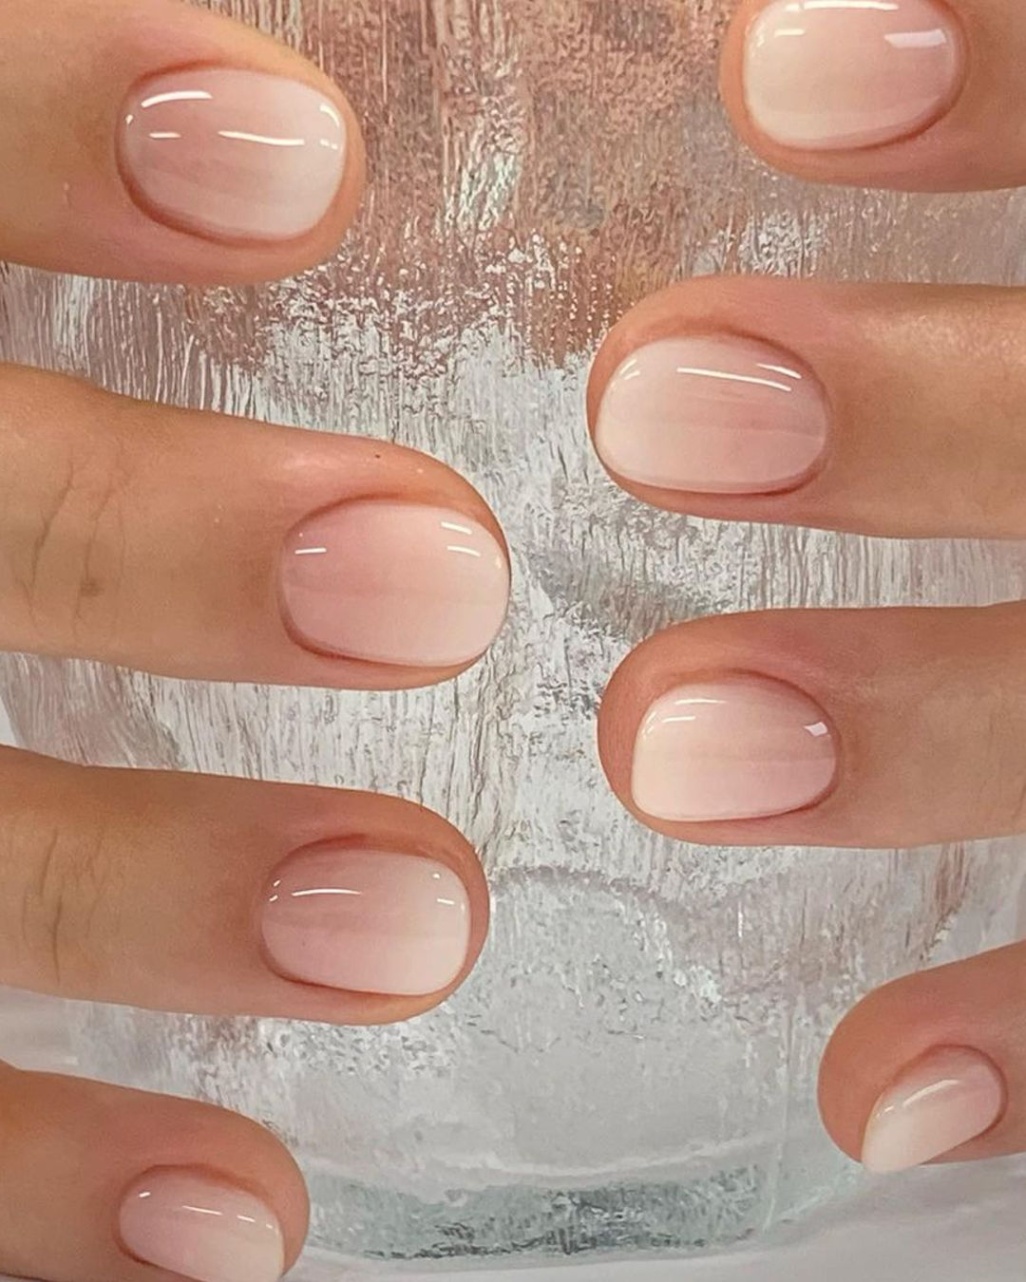 Chic & Simple: Elevate Your Look With Minimalist Nail Designs